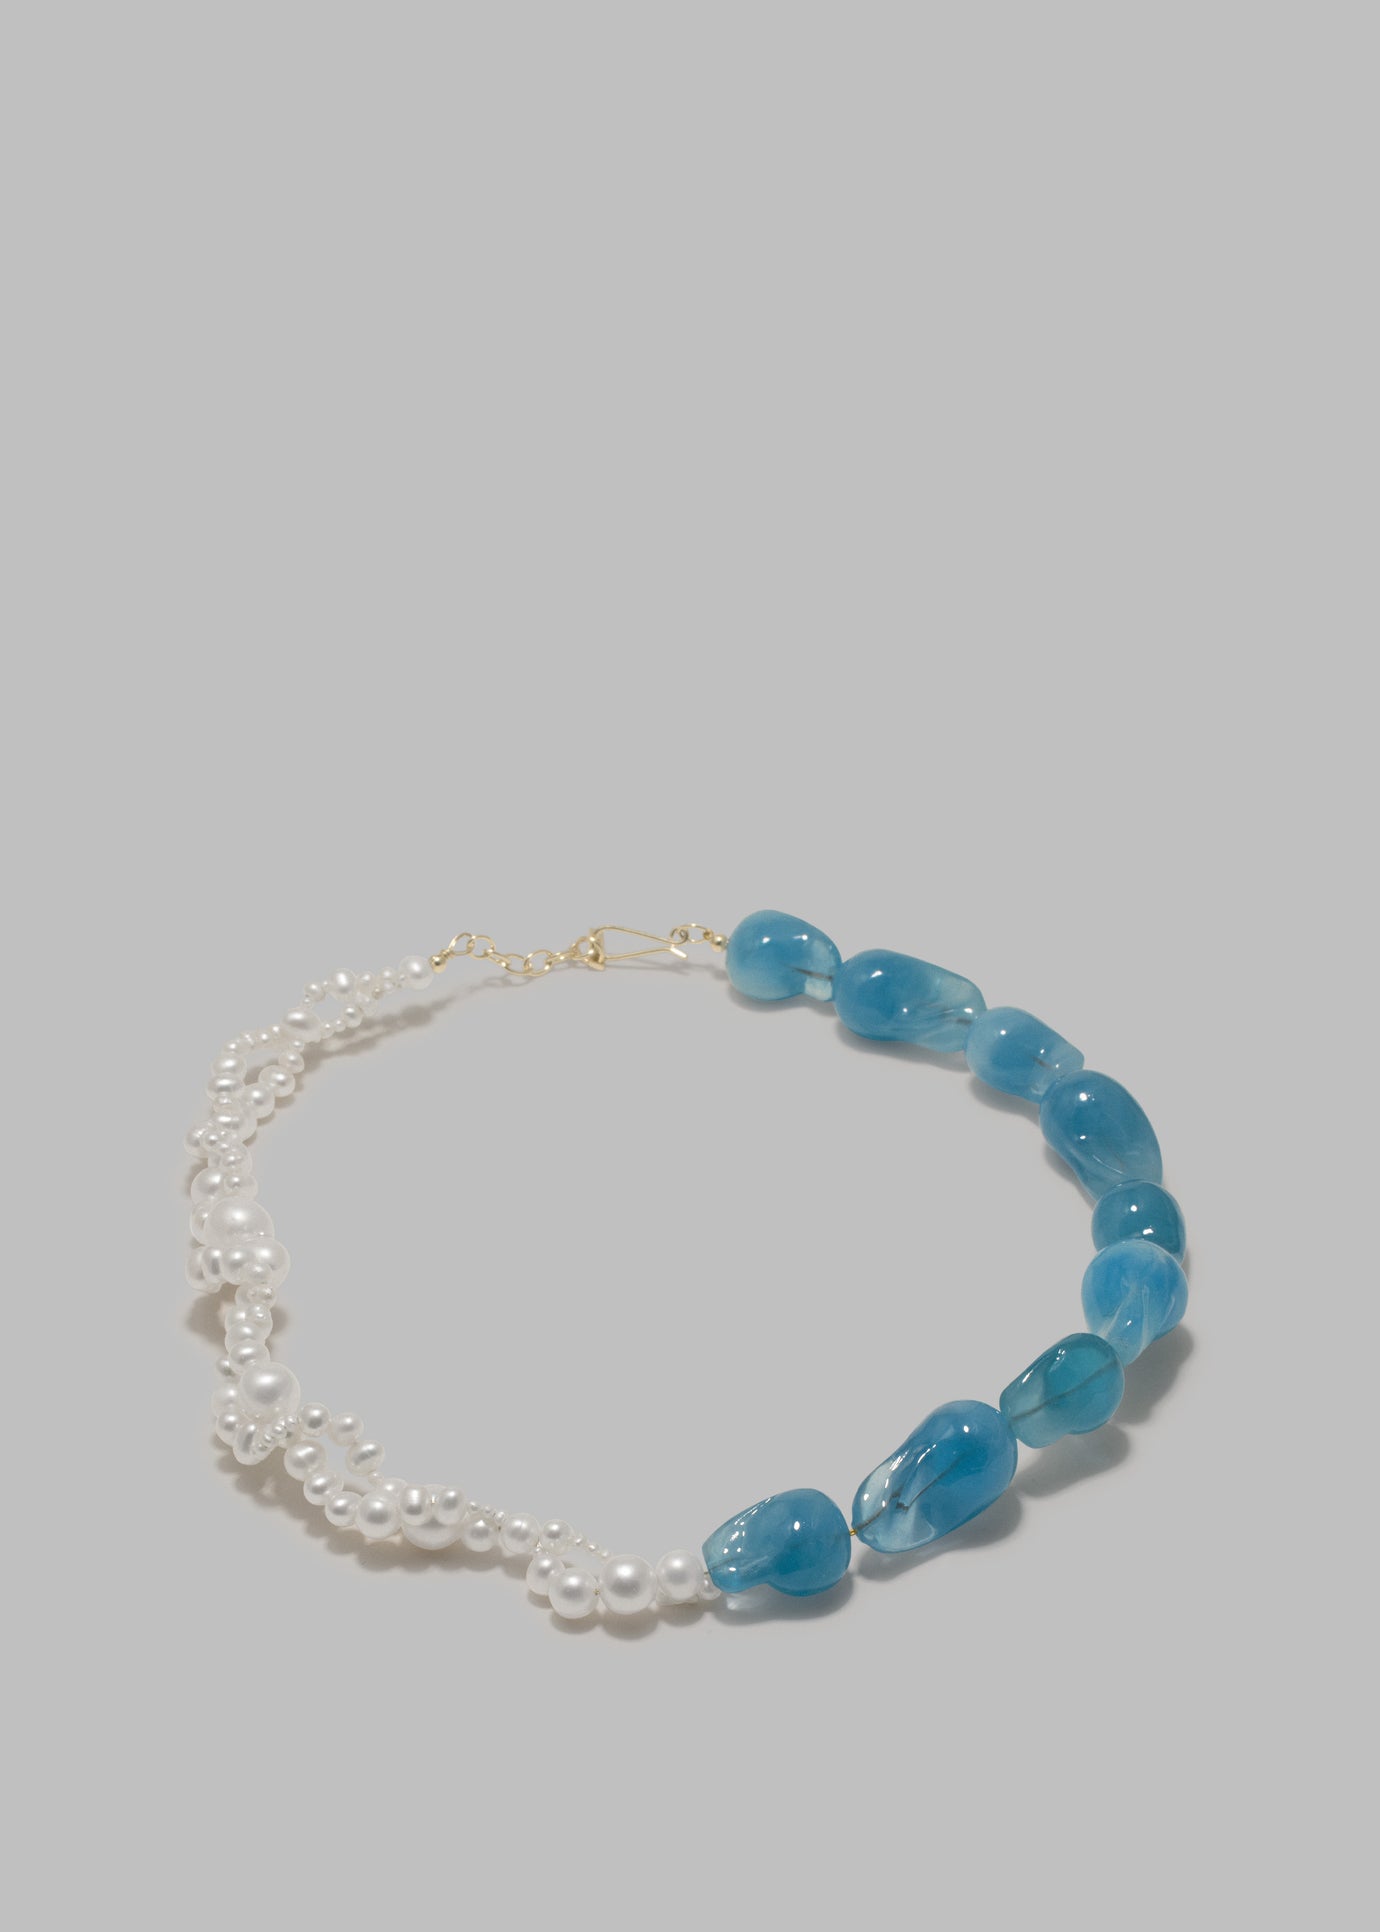 Completedworks Parade of Possibilities II Necklace - Pearl/Blue